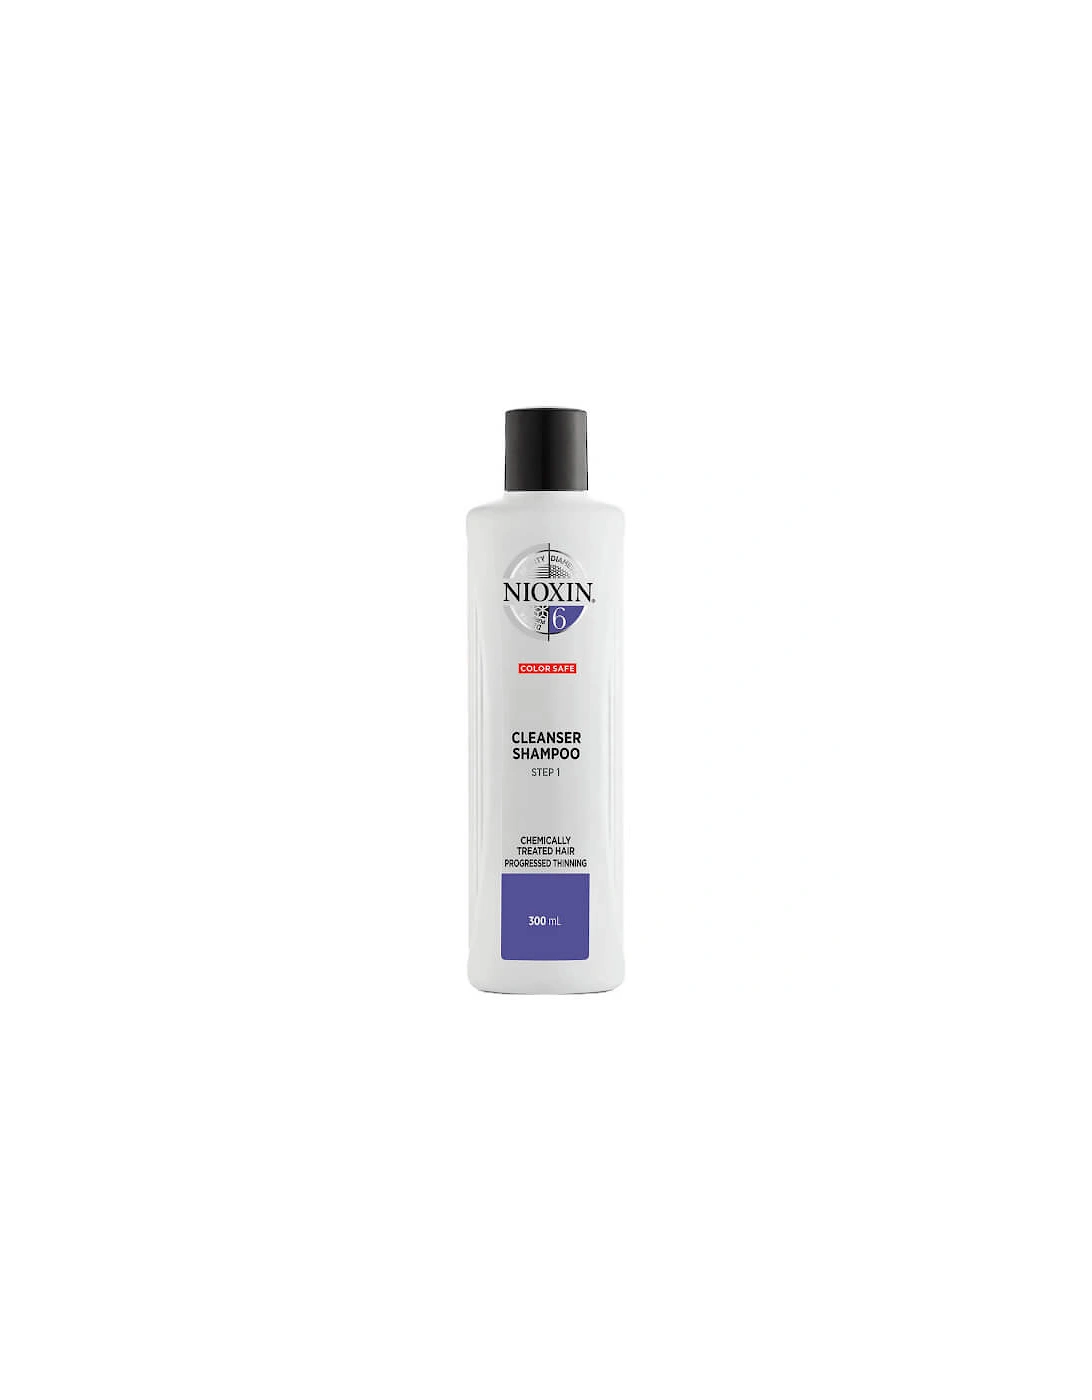 3-Part System 6 Cleanser Shampoo for Chemically Treated Hair with Progressed Thinning 300ml, 2 of 1